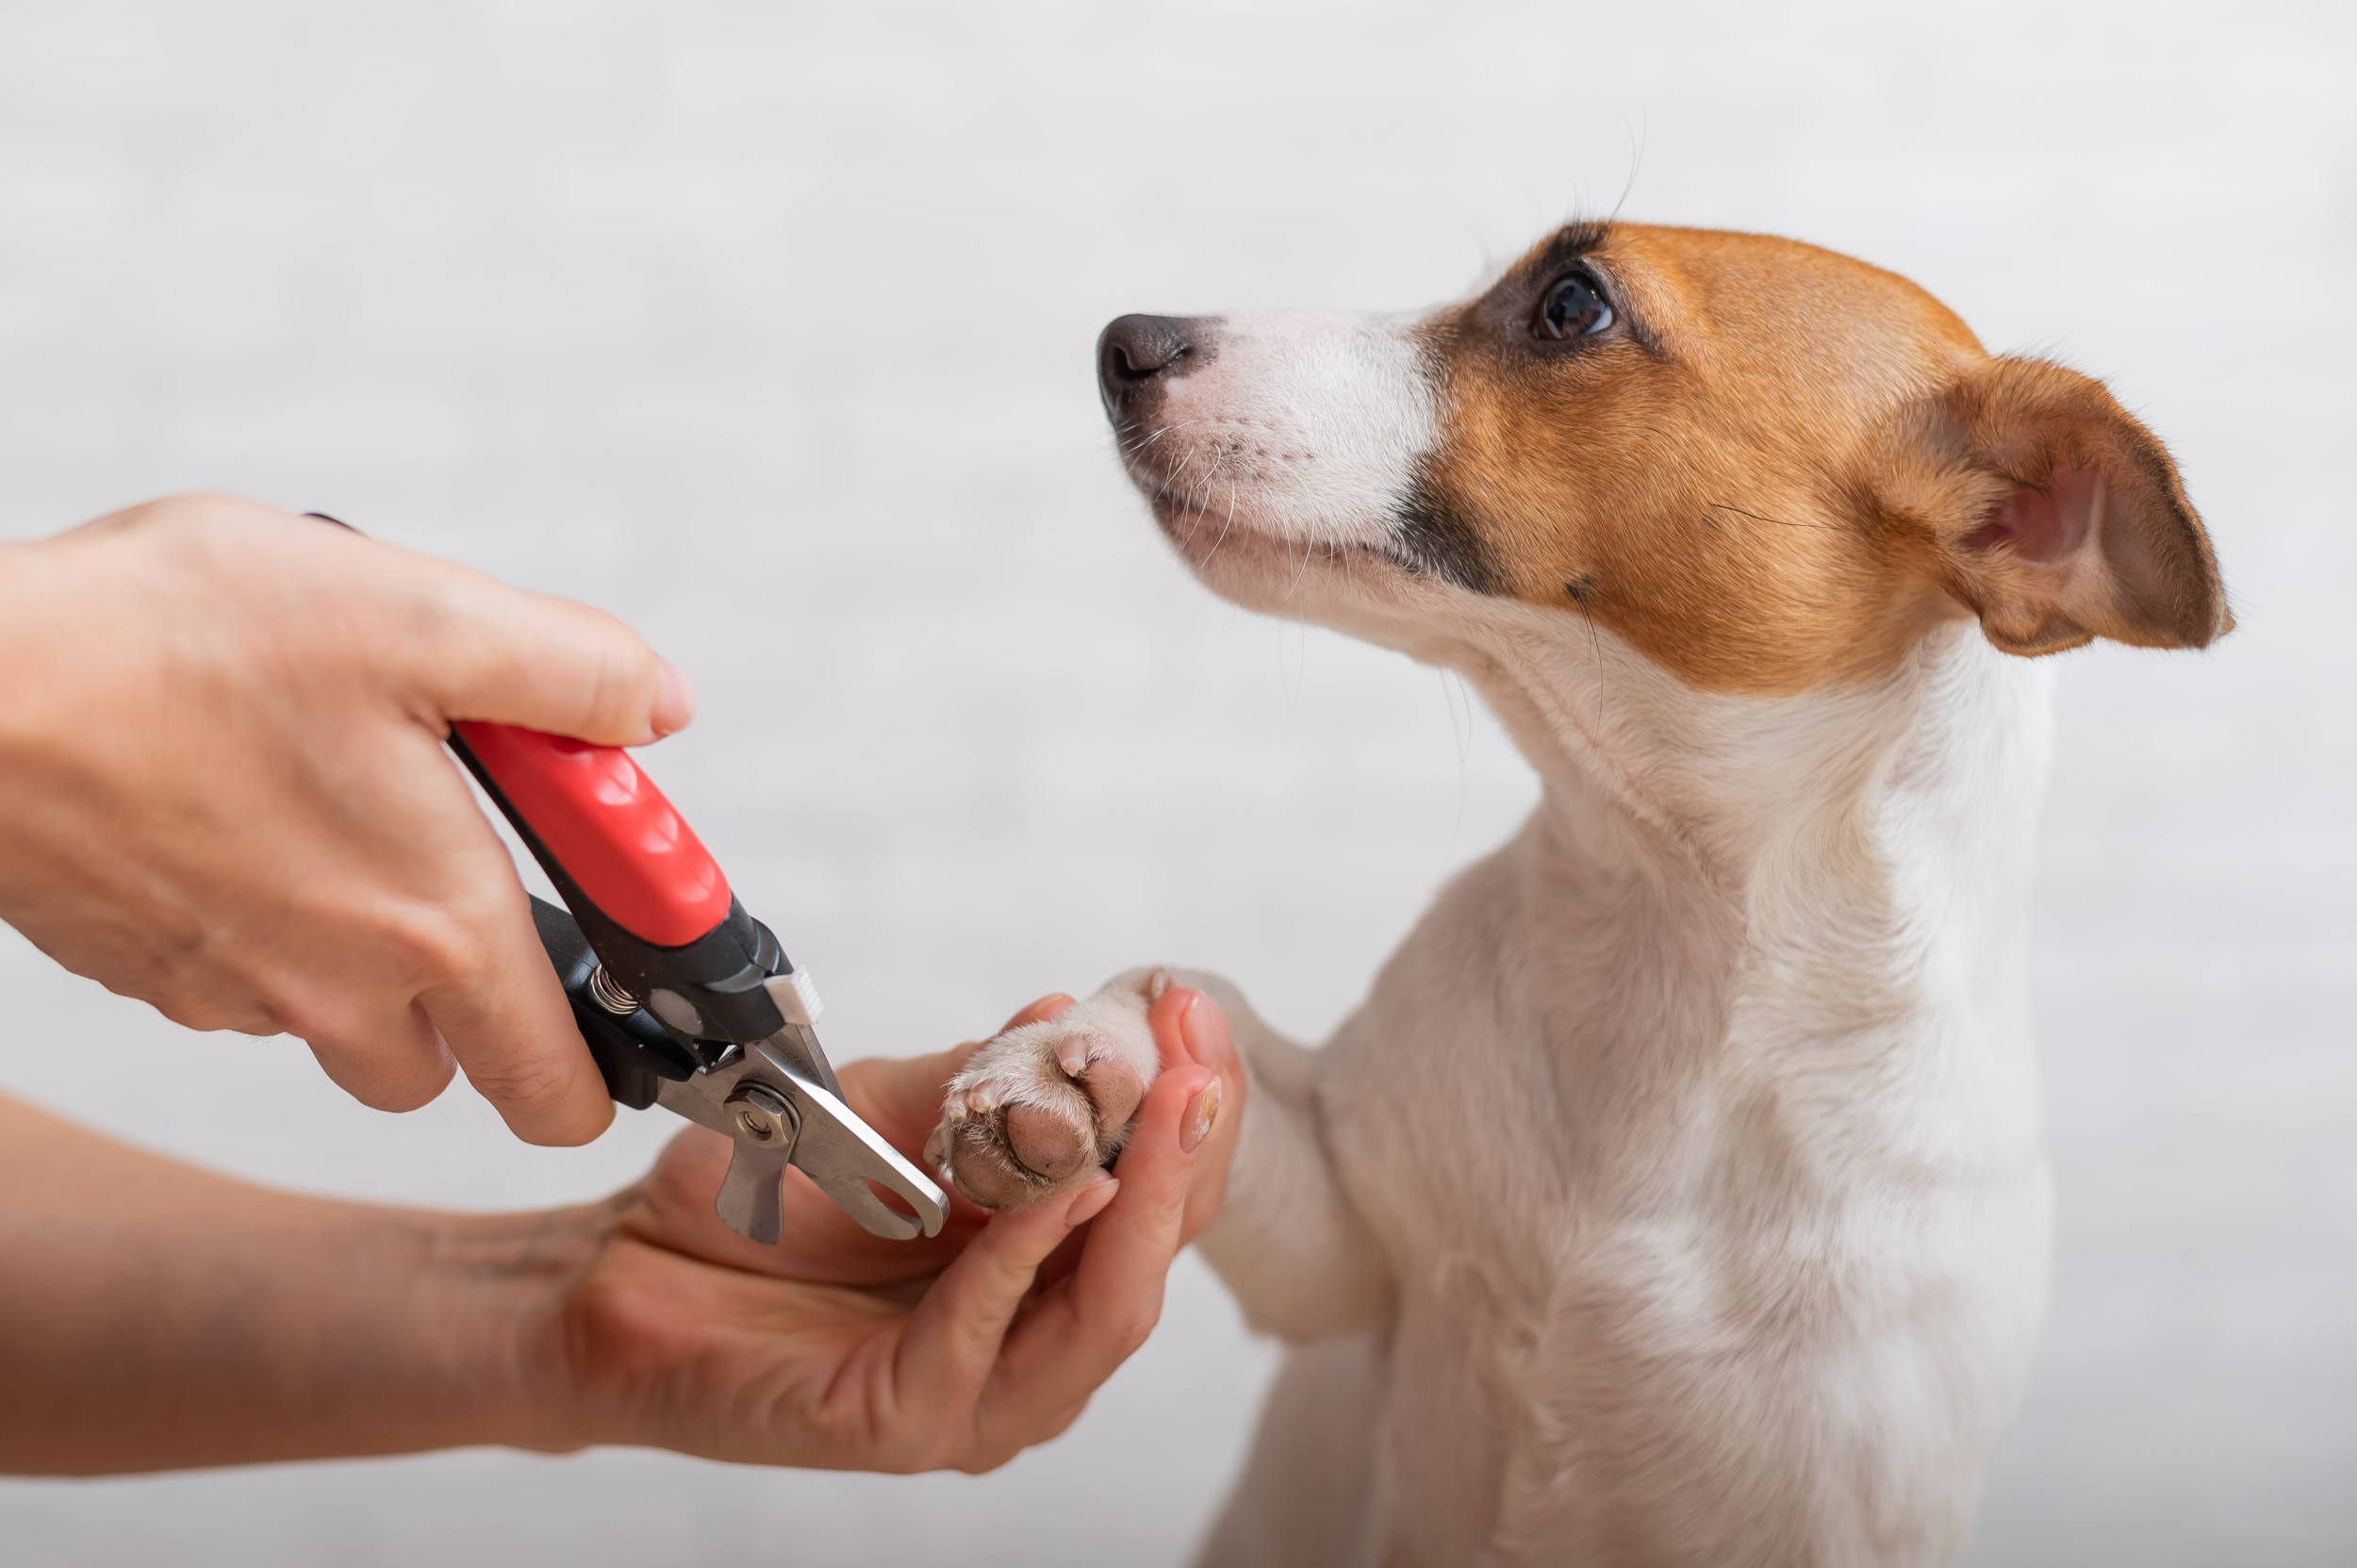 Pet Community - What is the right age to cut dog's nails?